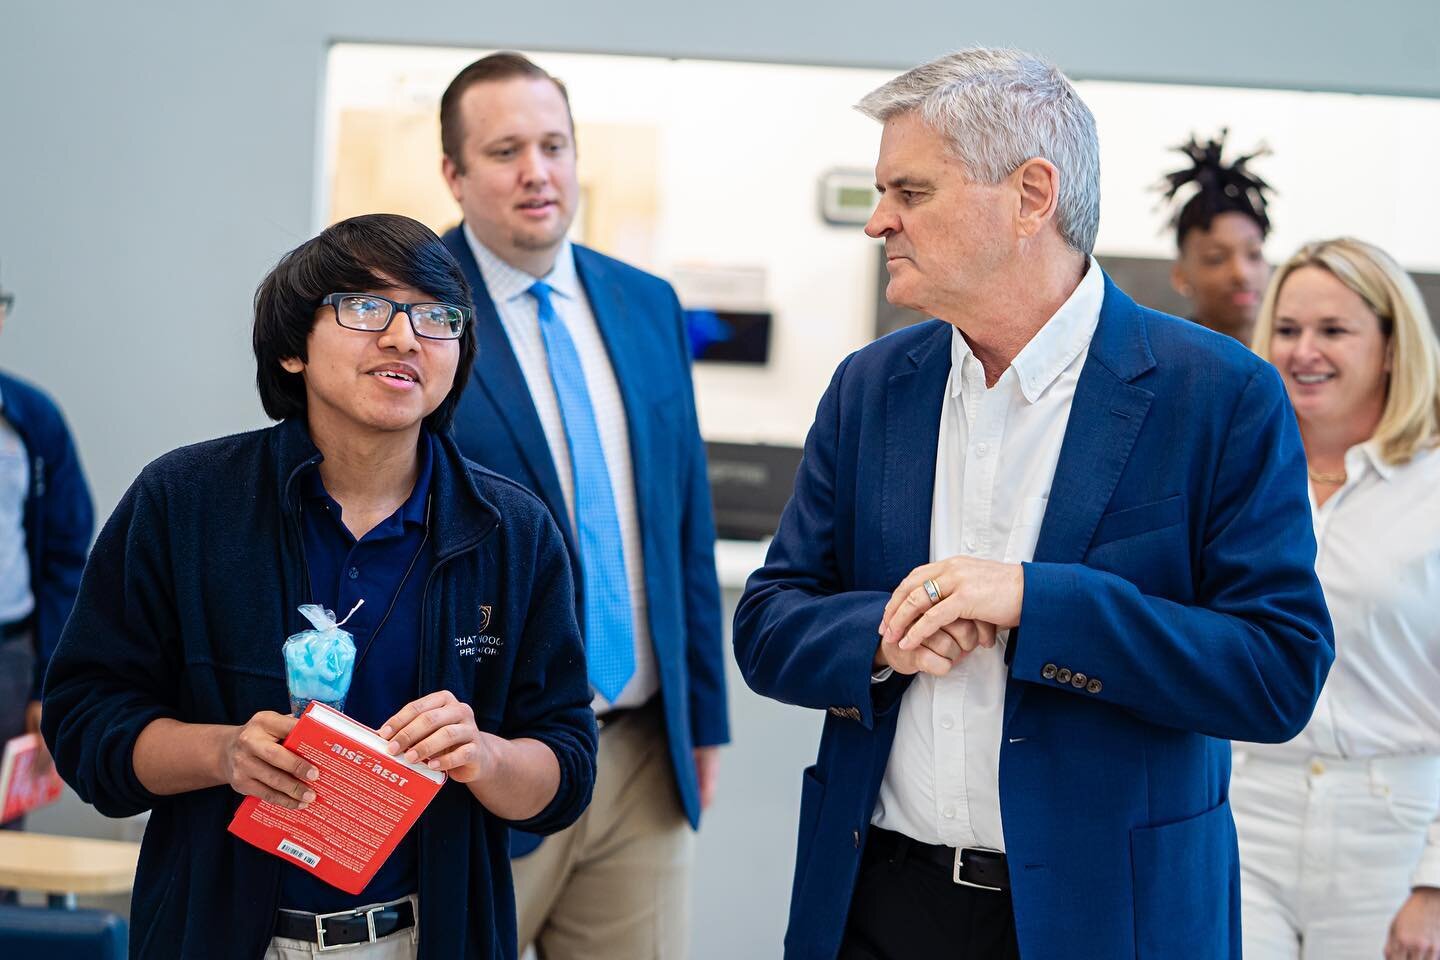 We enjoyed touring and hosting a round table discussion with AOL founder @stevecase and a group of our student leaders.

He encouraged our students to persist through whatever roadblocks and setbacks there may be as they set forth on their respective